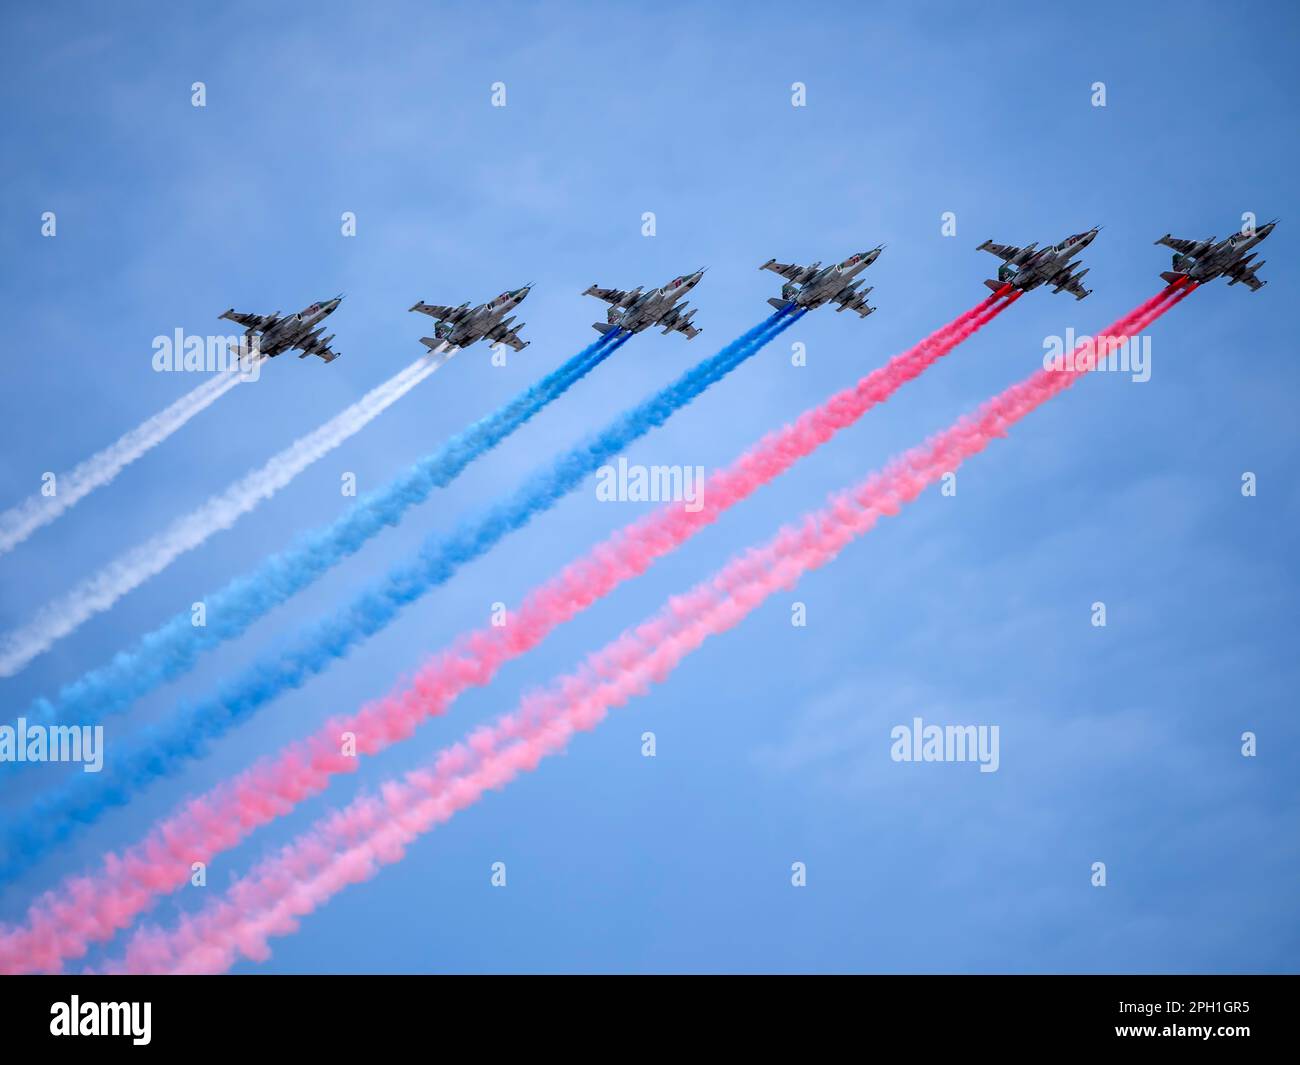 MOSCOW, RUSSIA - MAY 7, 2022: Avia parade in Moscow. Group of Russian fighters Sukhoi Su-25 with painted russian flag in the sky on parade of Victory Stock Photo